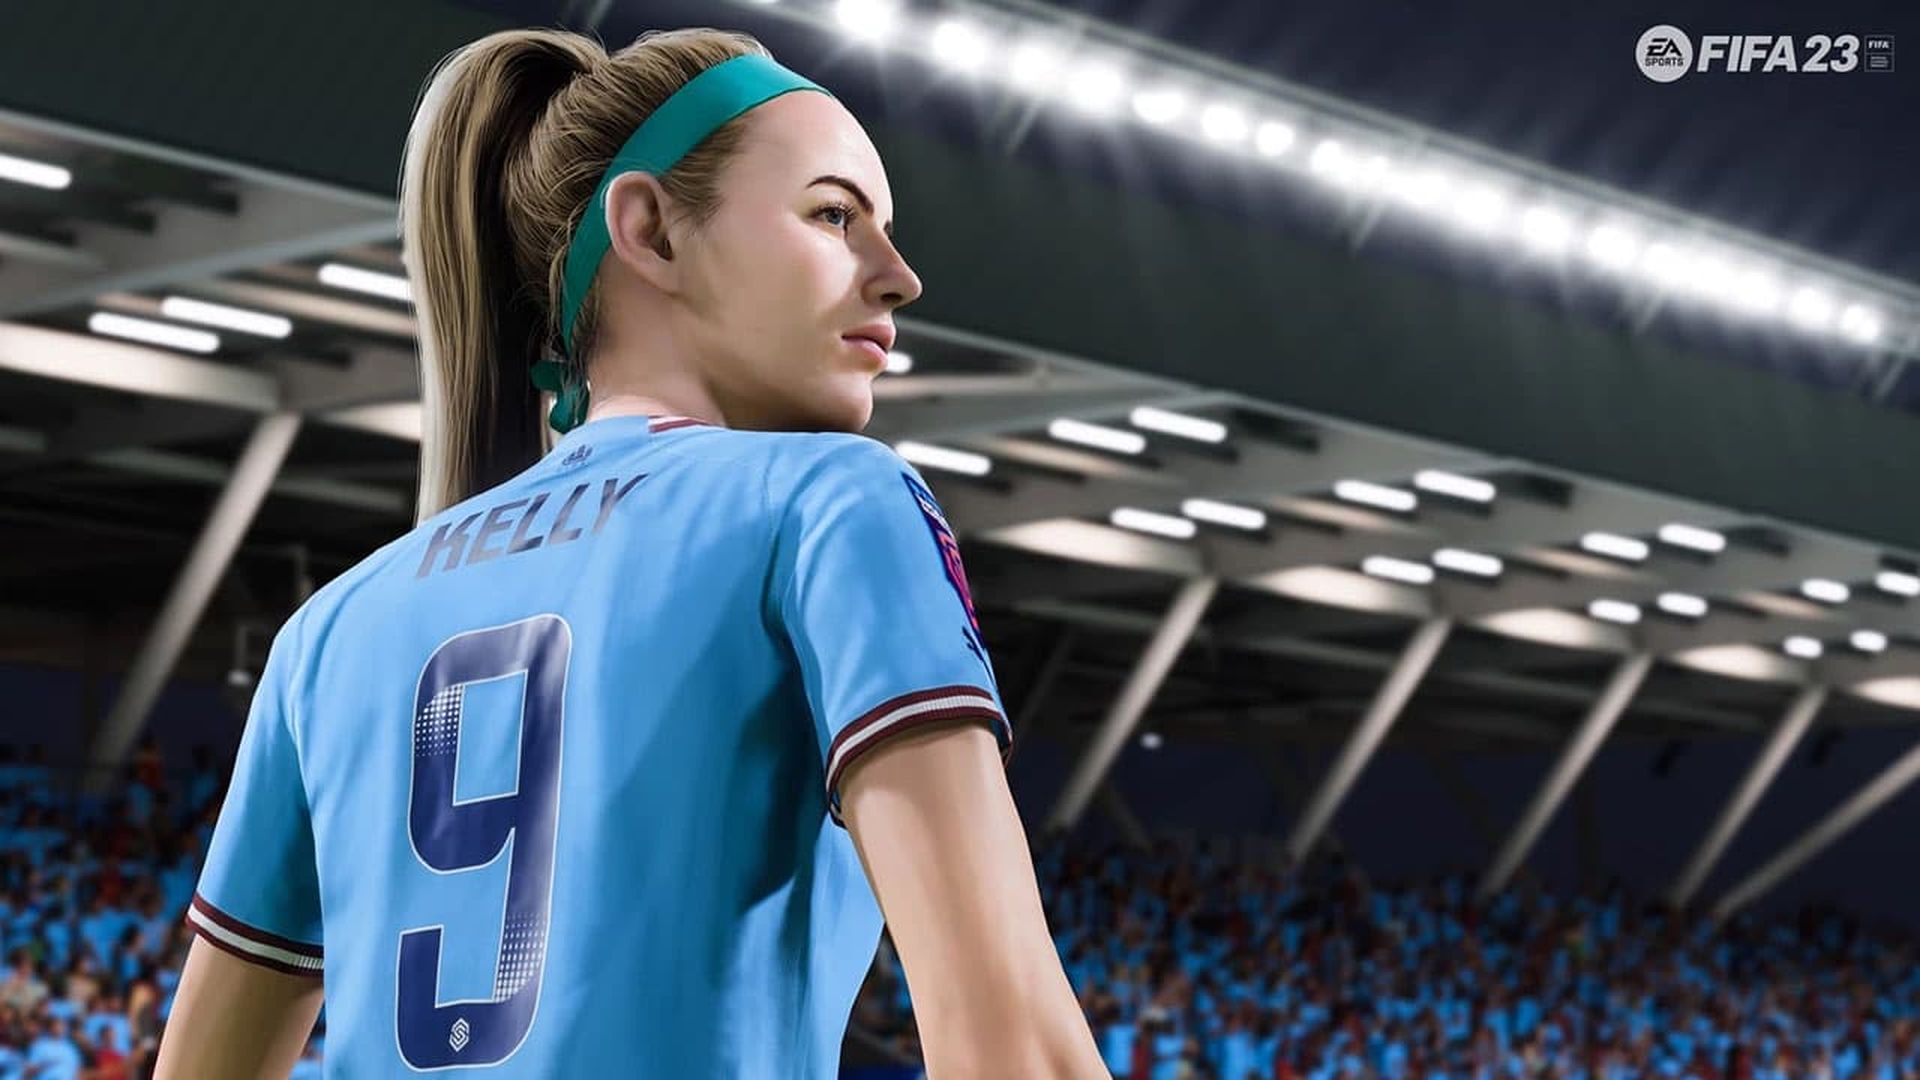 Before the game's release, FIFA 23 ratings have been revealed. This is a list of the top 50 players you can anticipate finding in the game.